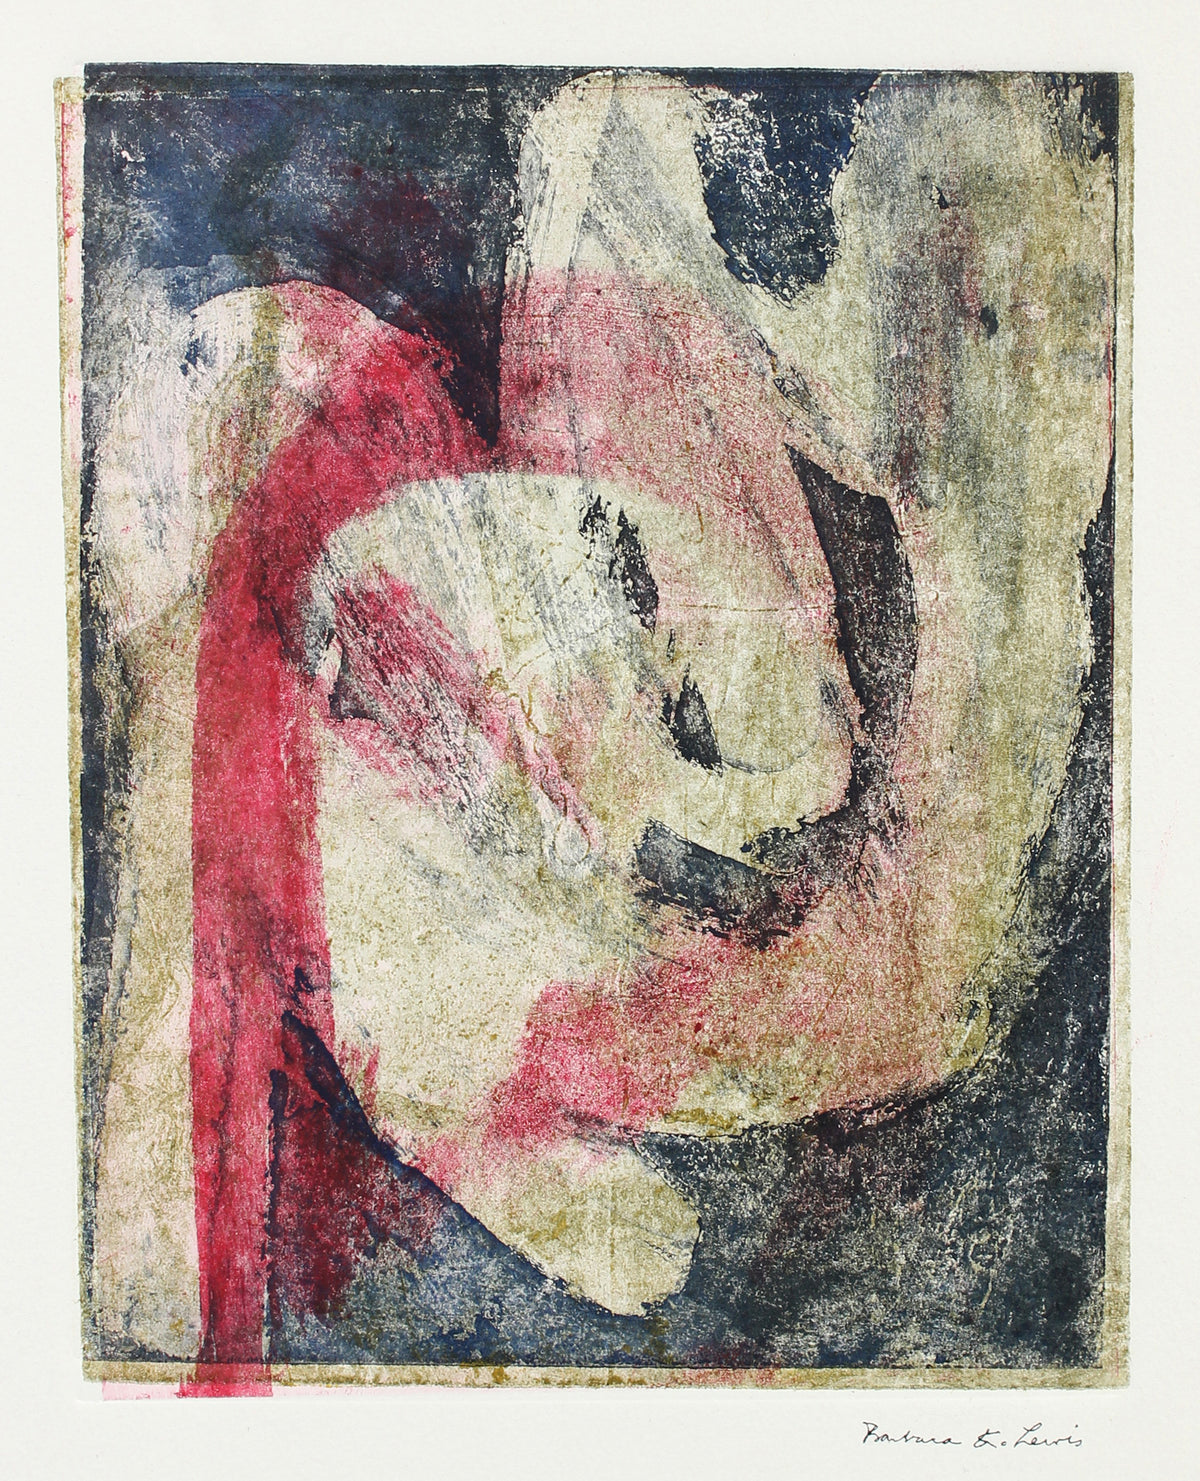 Fuzzy Abstract Gestural Study&lt;br&gt;1970 Multilayer Etching&lt;br&gt;&lt;br&gt;#A5946